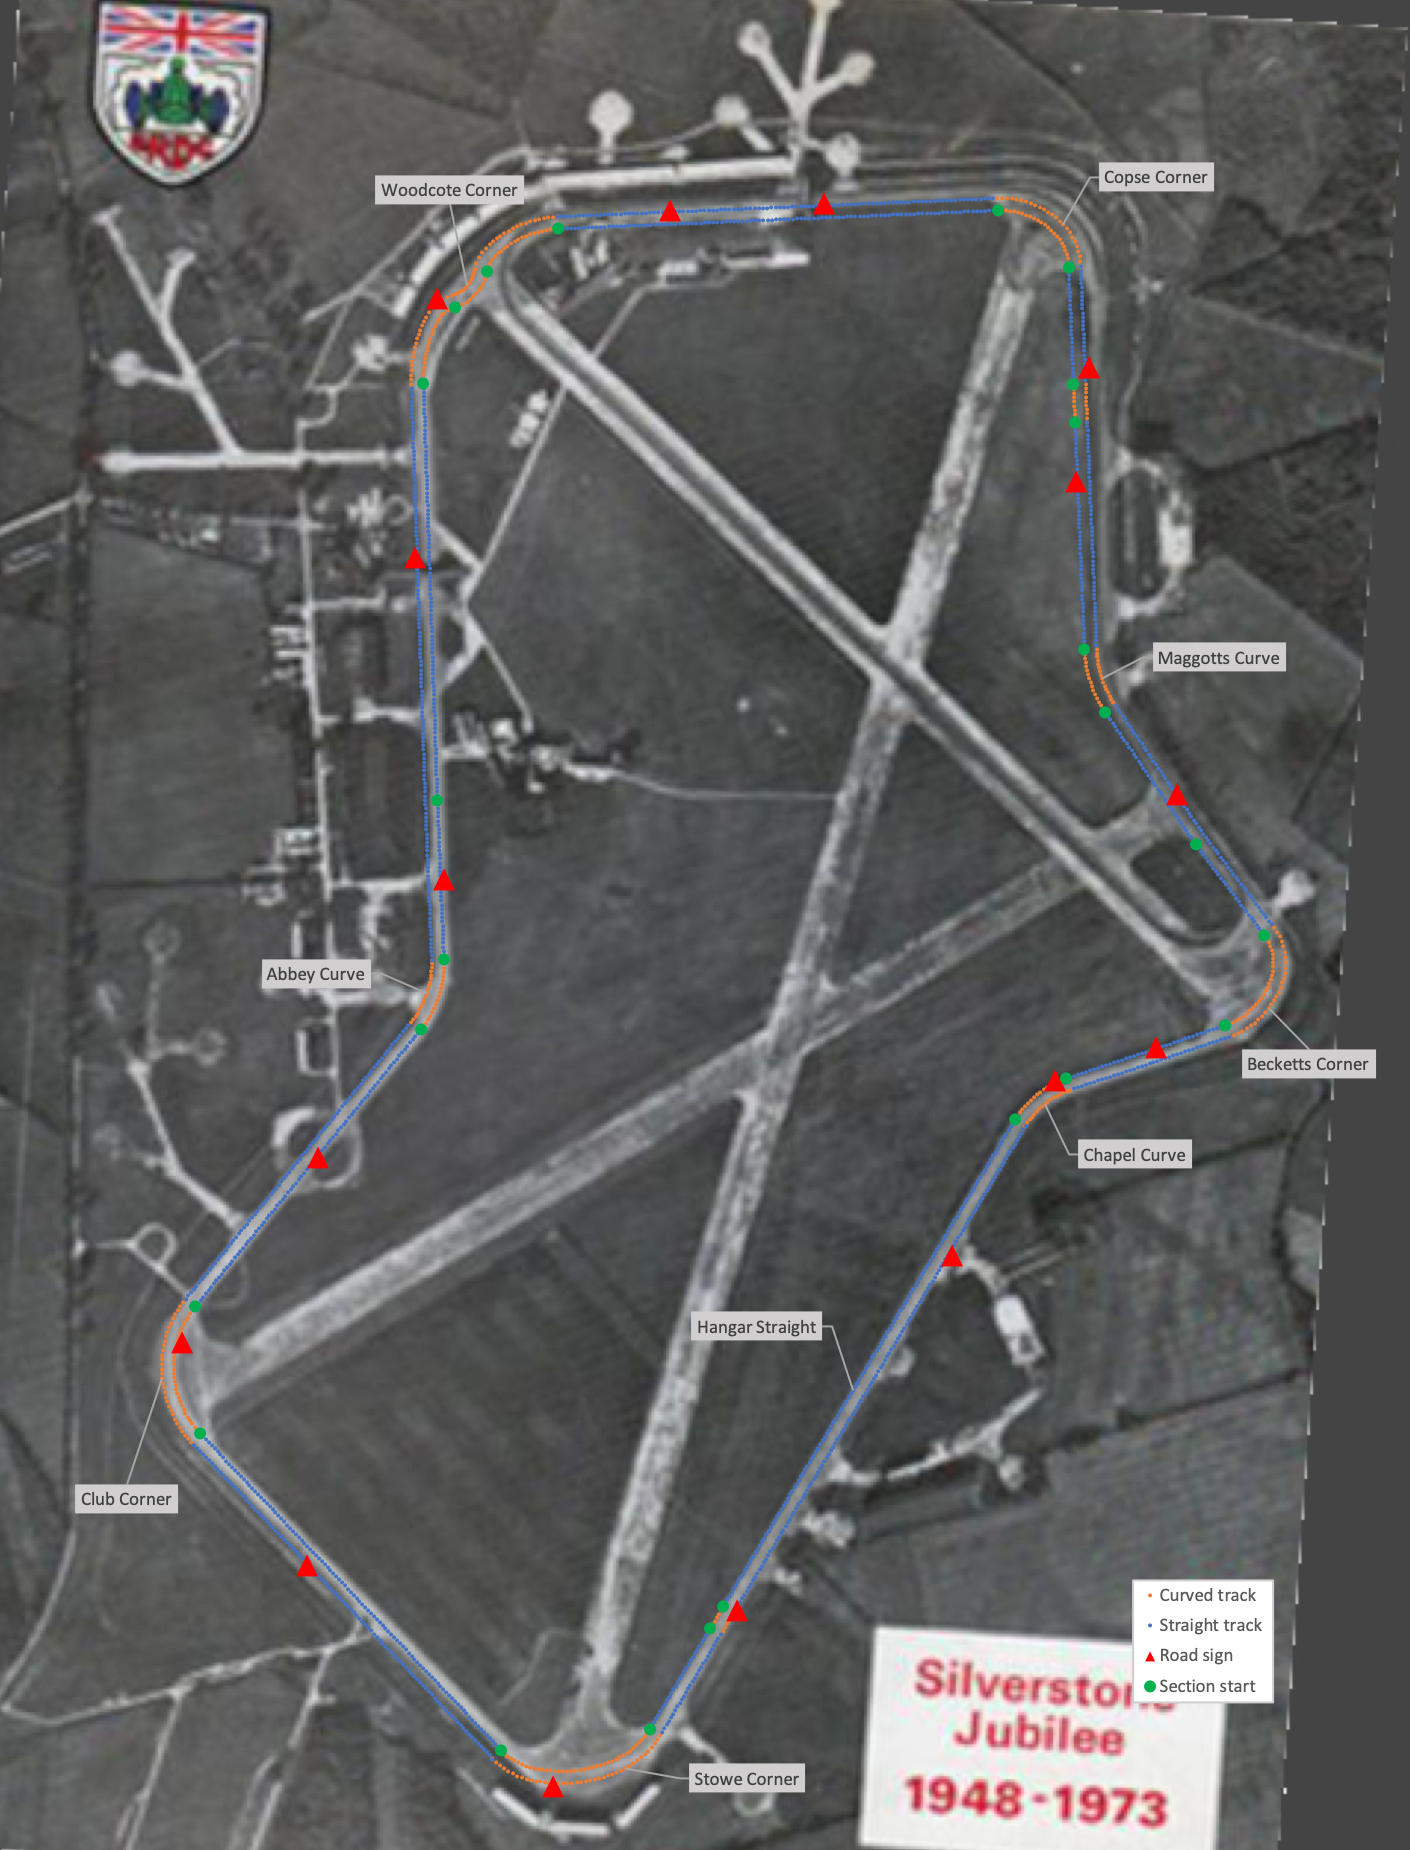 The Silverstone track in Revs, superimposed over a satellite image of the track